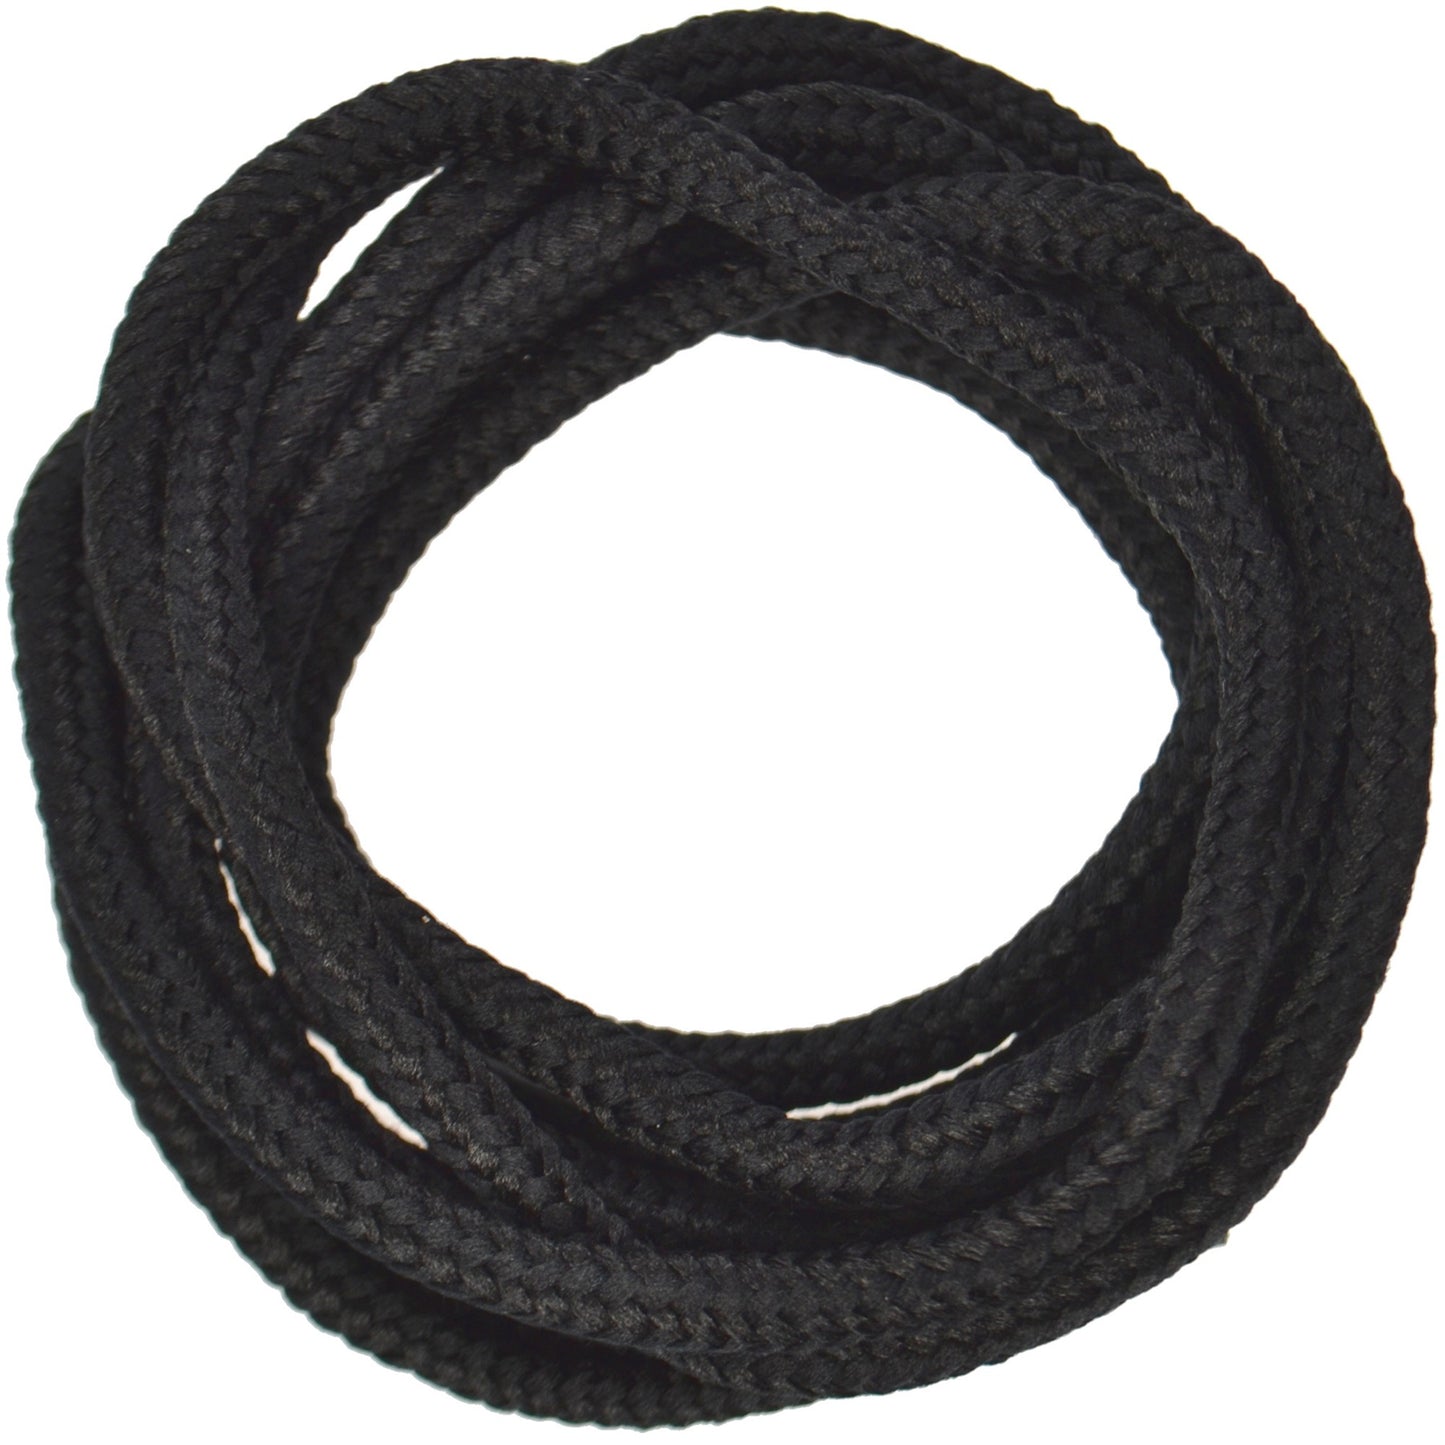 90cm Worksite Cord Work Boot Shoe Laces - Black